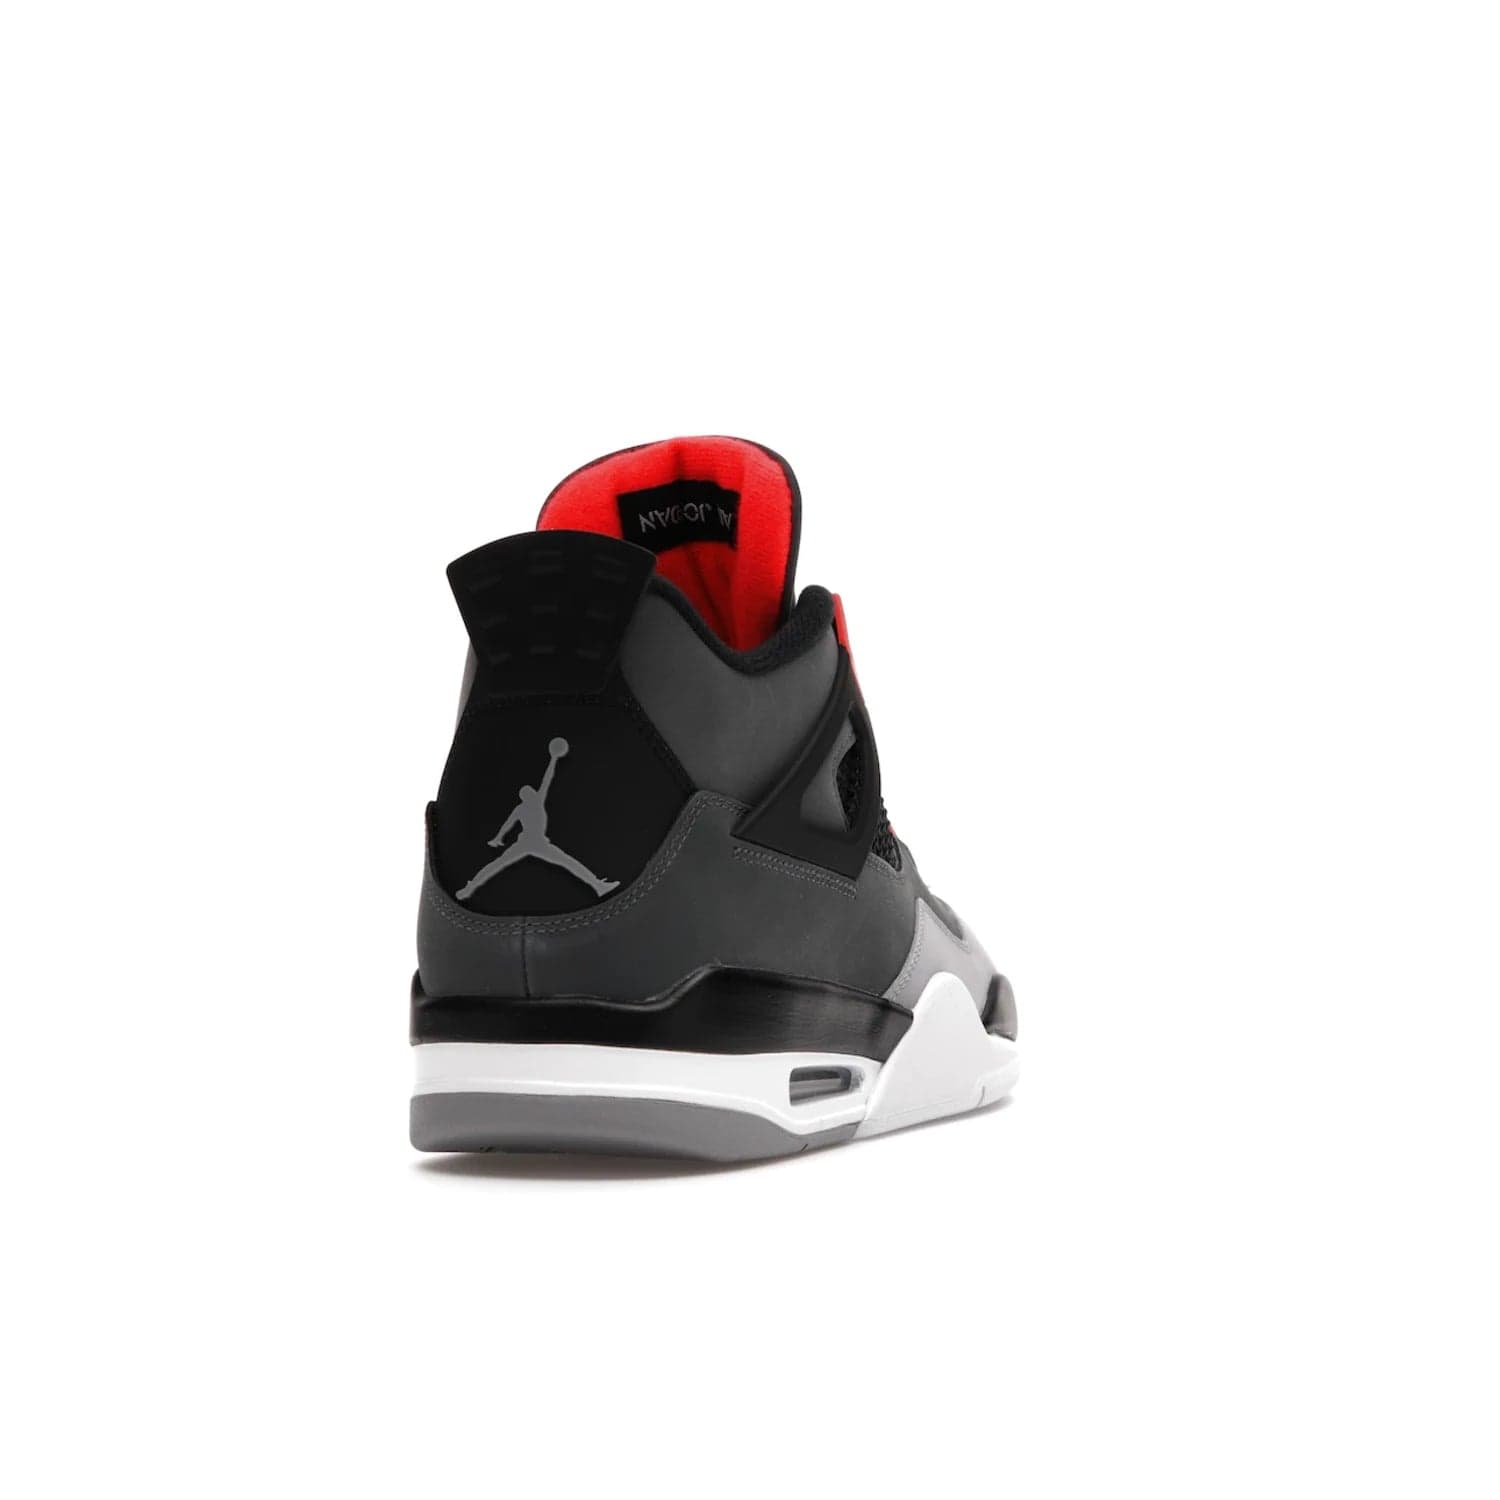 Jordan 4 Retro Infrared - Image 30 - Only at www.BallersClubKickz.com - Introducing the classic & timeless Air Jordan 4 Infrared. Durabuck upper, TPU mesh inserts, tech straps & heel tabs in dark grey and infrared accents. White sole with visible Air units. Out June 15, 2022. Get your pair now!